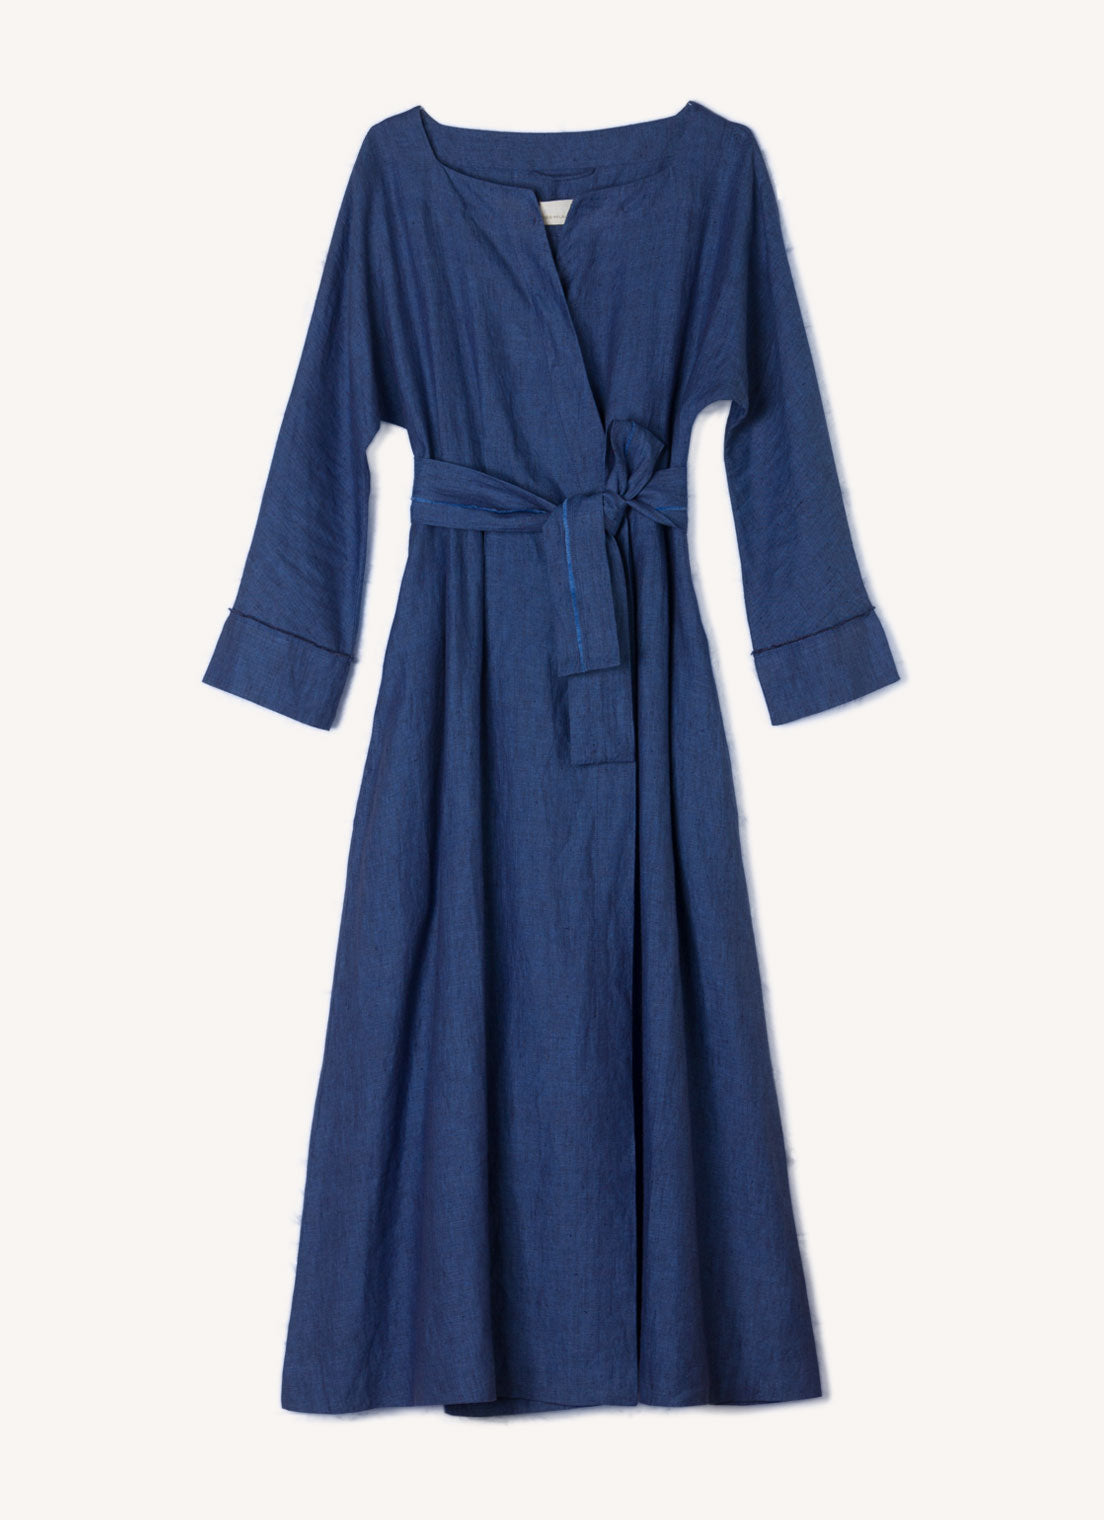 A blue, wrap, midi-length dress with open, square-cut neckline and long, cuffed sleeves with hand frayed edge finish made from European linen